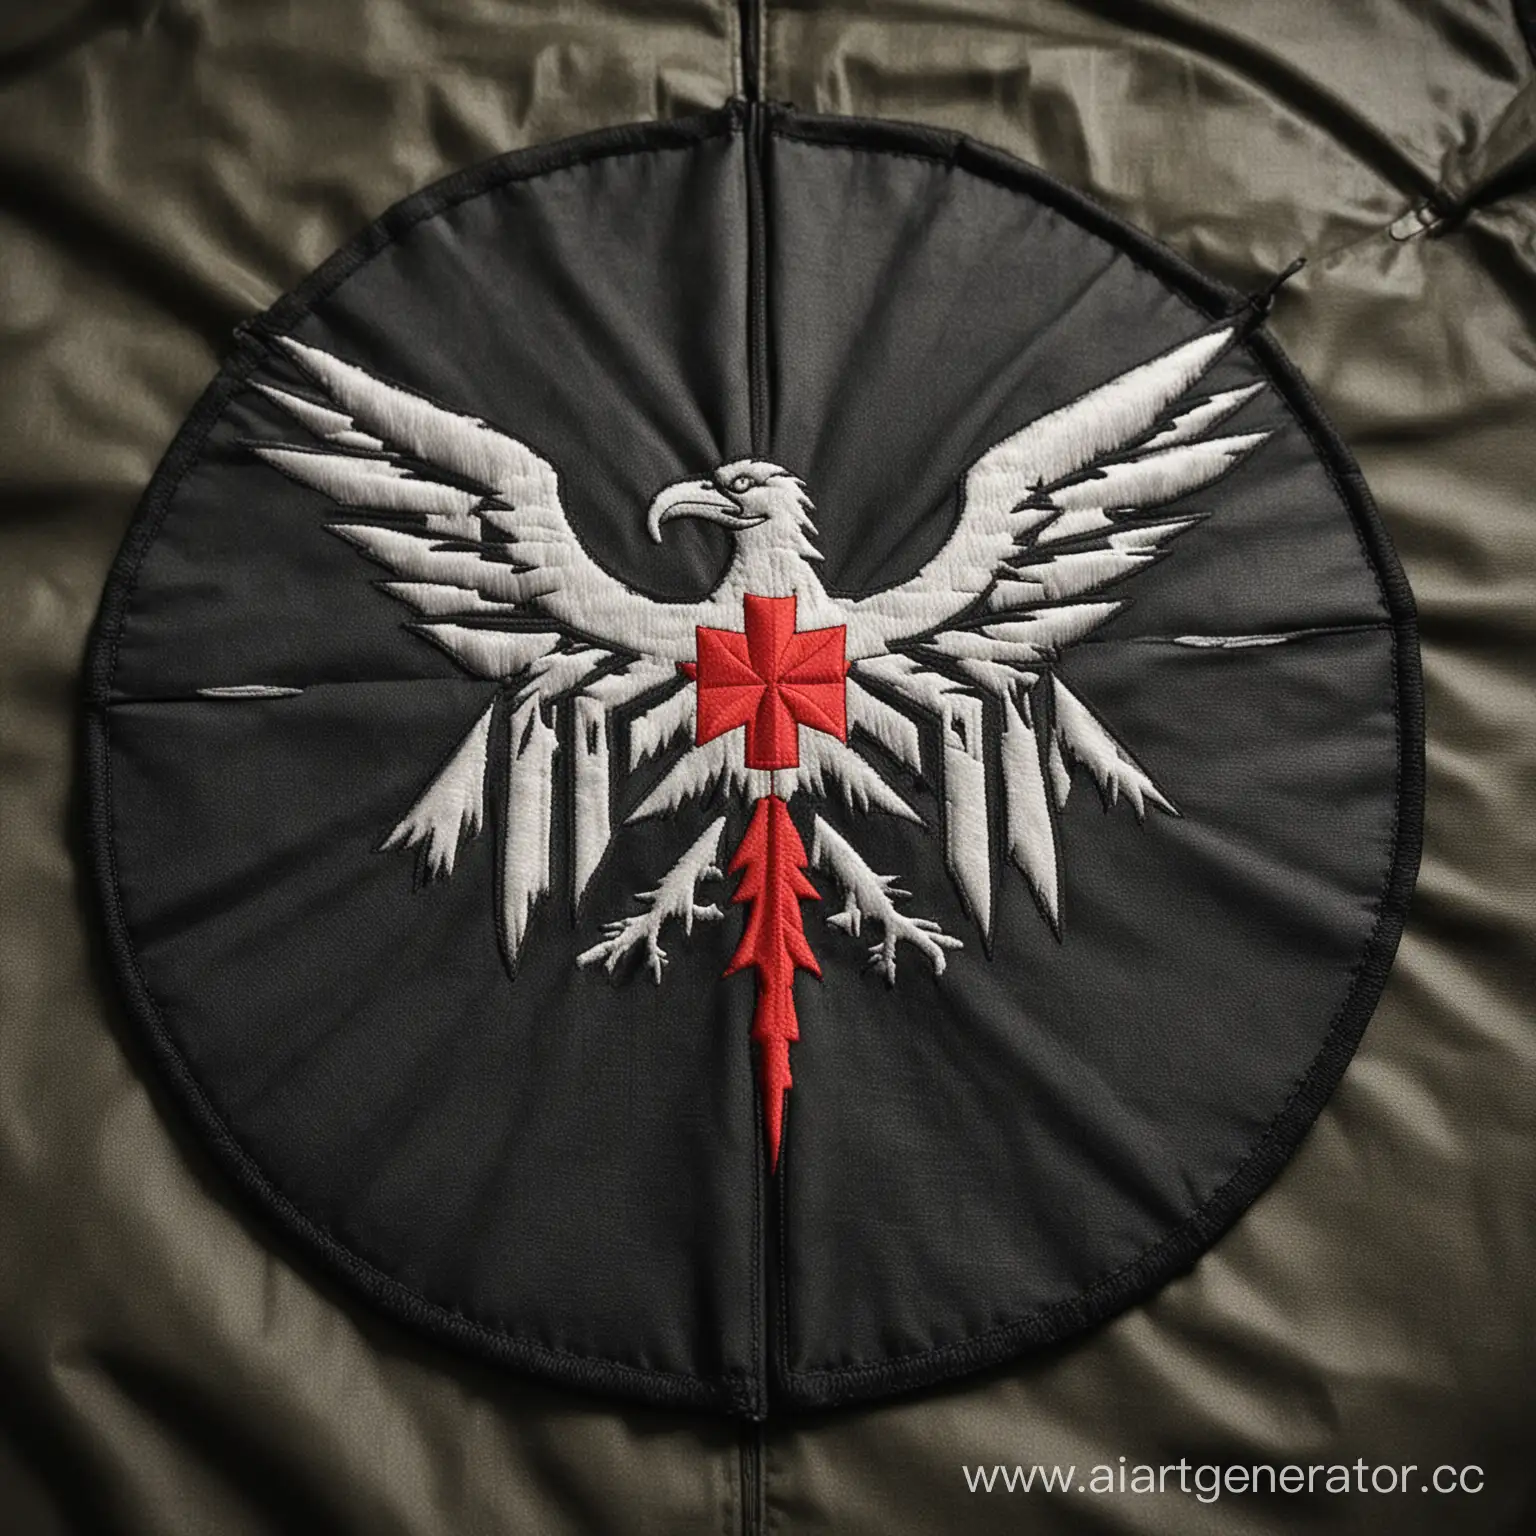 Sniper-Jacket-Patch-Design-with-Crow-Umbrella-Corporation-Symbol-and-Knives